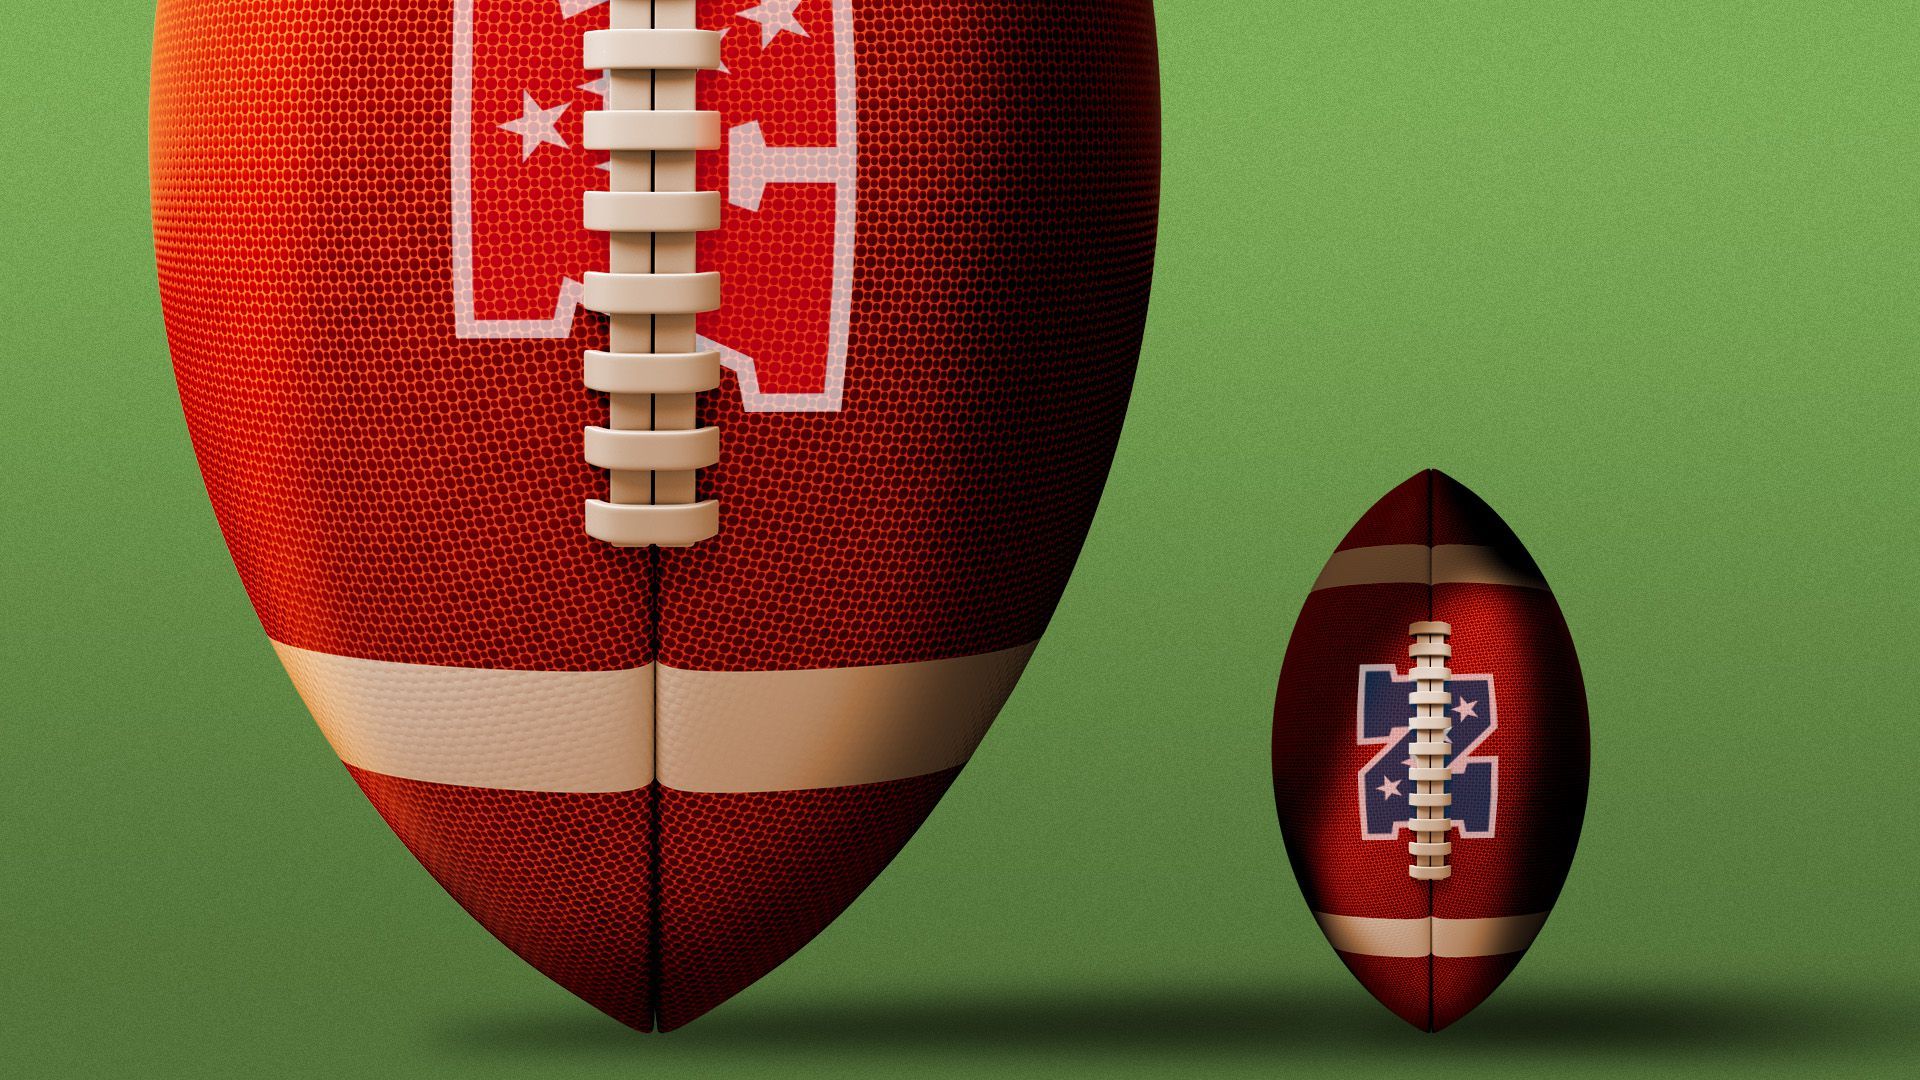 Illustration of a giant football with the AFC logo dwarfing a football with the NFC